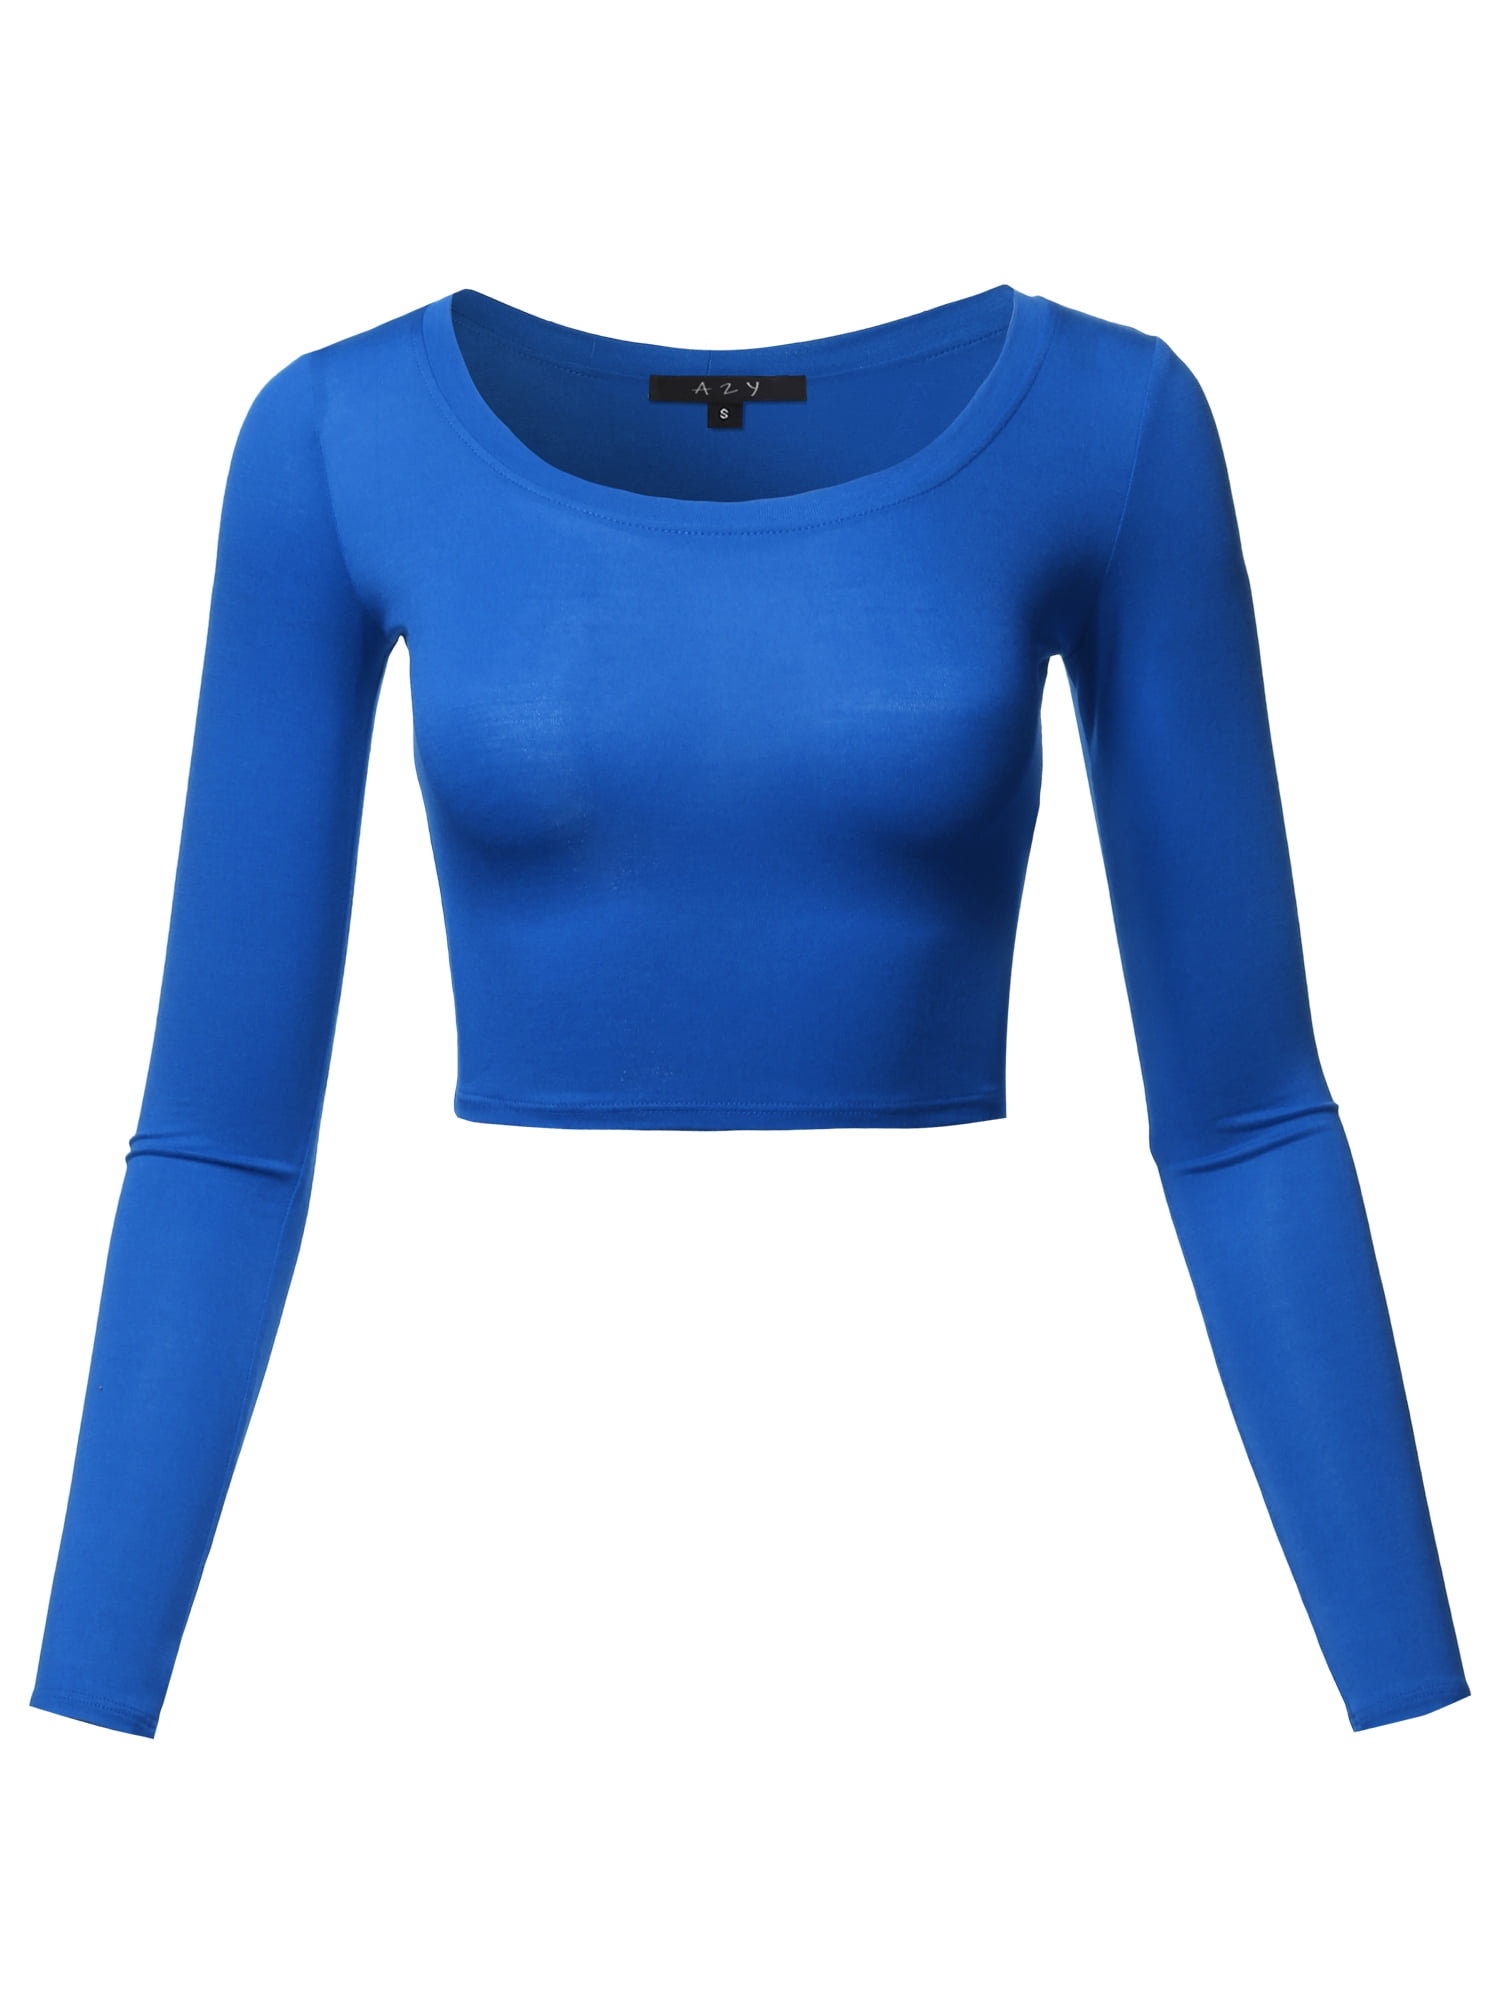 A2Y A2Y Women #39 s Basic Solid Stretchable Scoop Neck Long Sleeve Crop